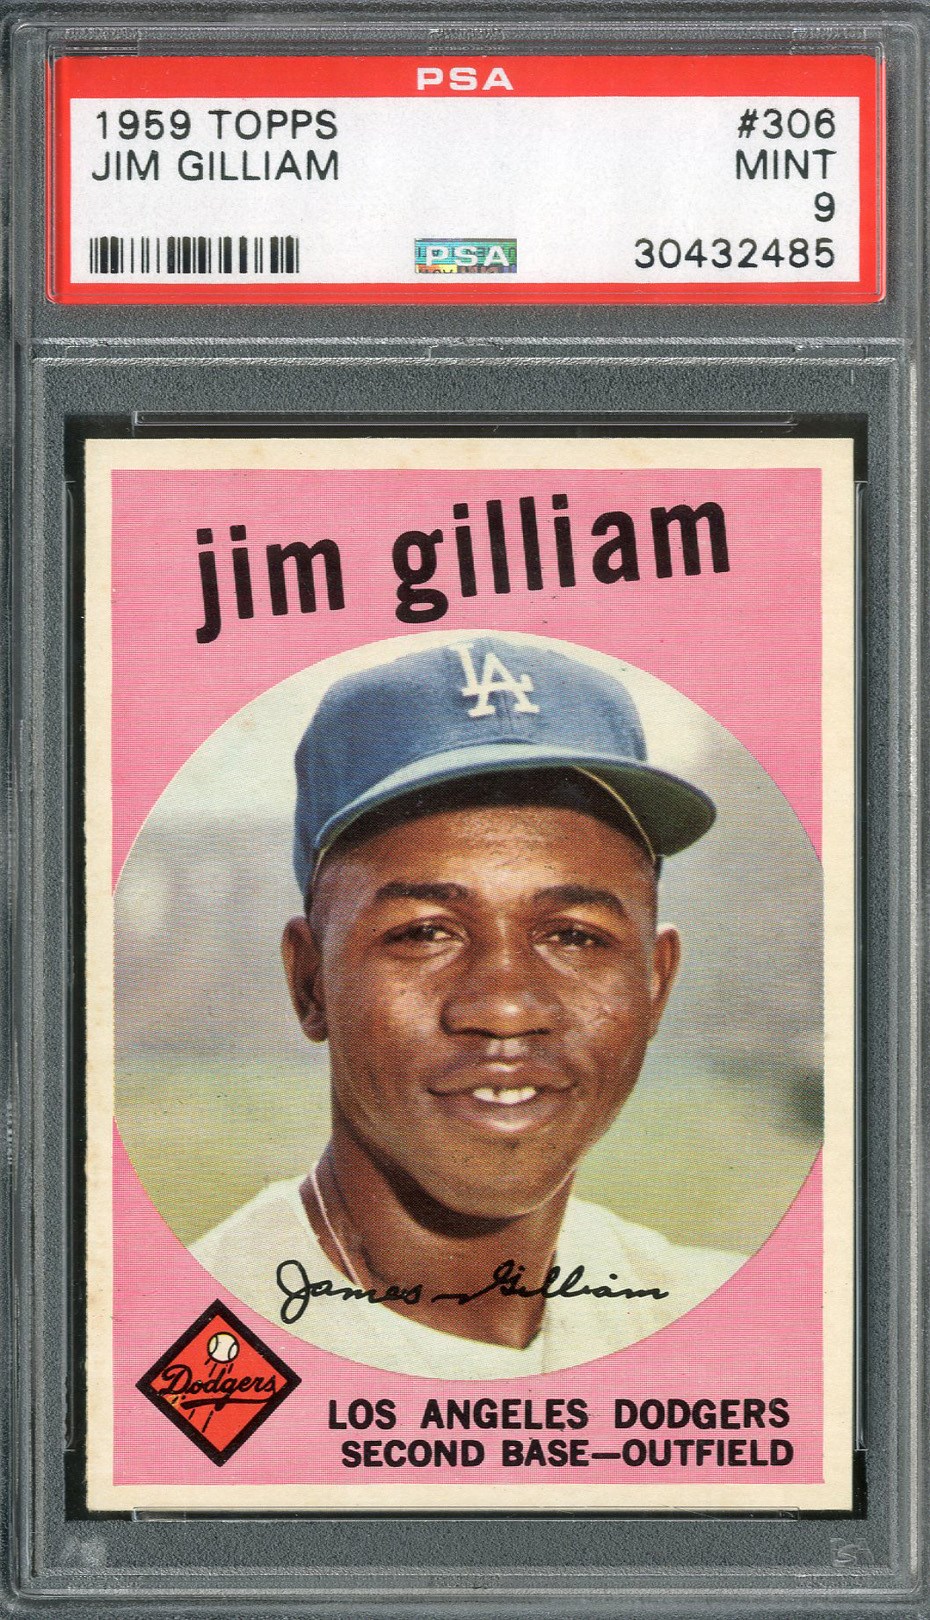 Baseball and Trading Cards - 1959 Topps #306 Jim Gilliam PSA MINT 9